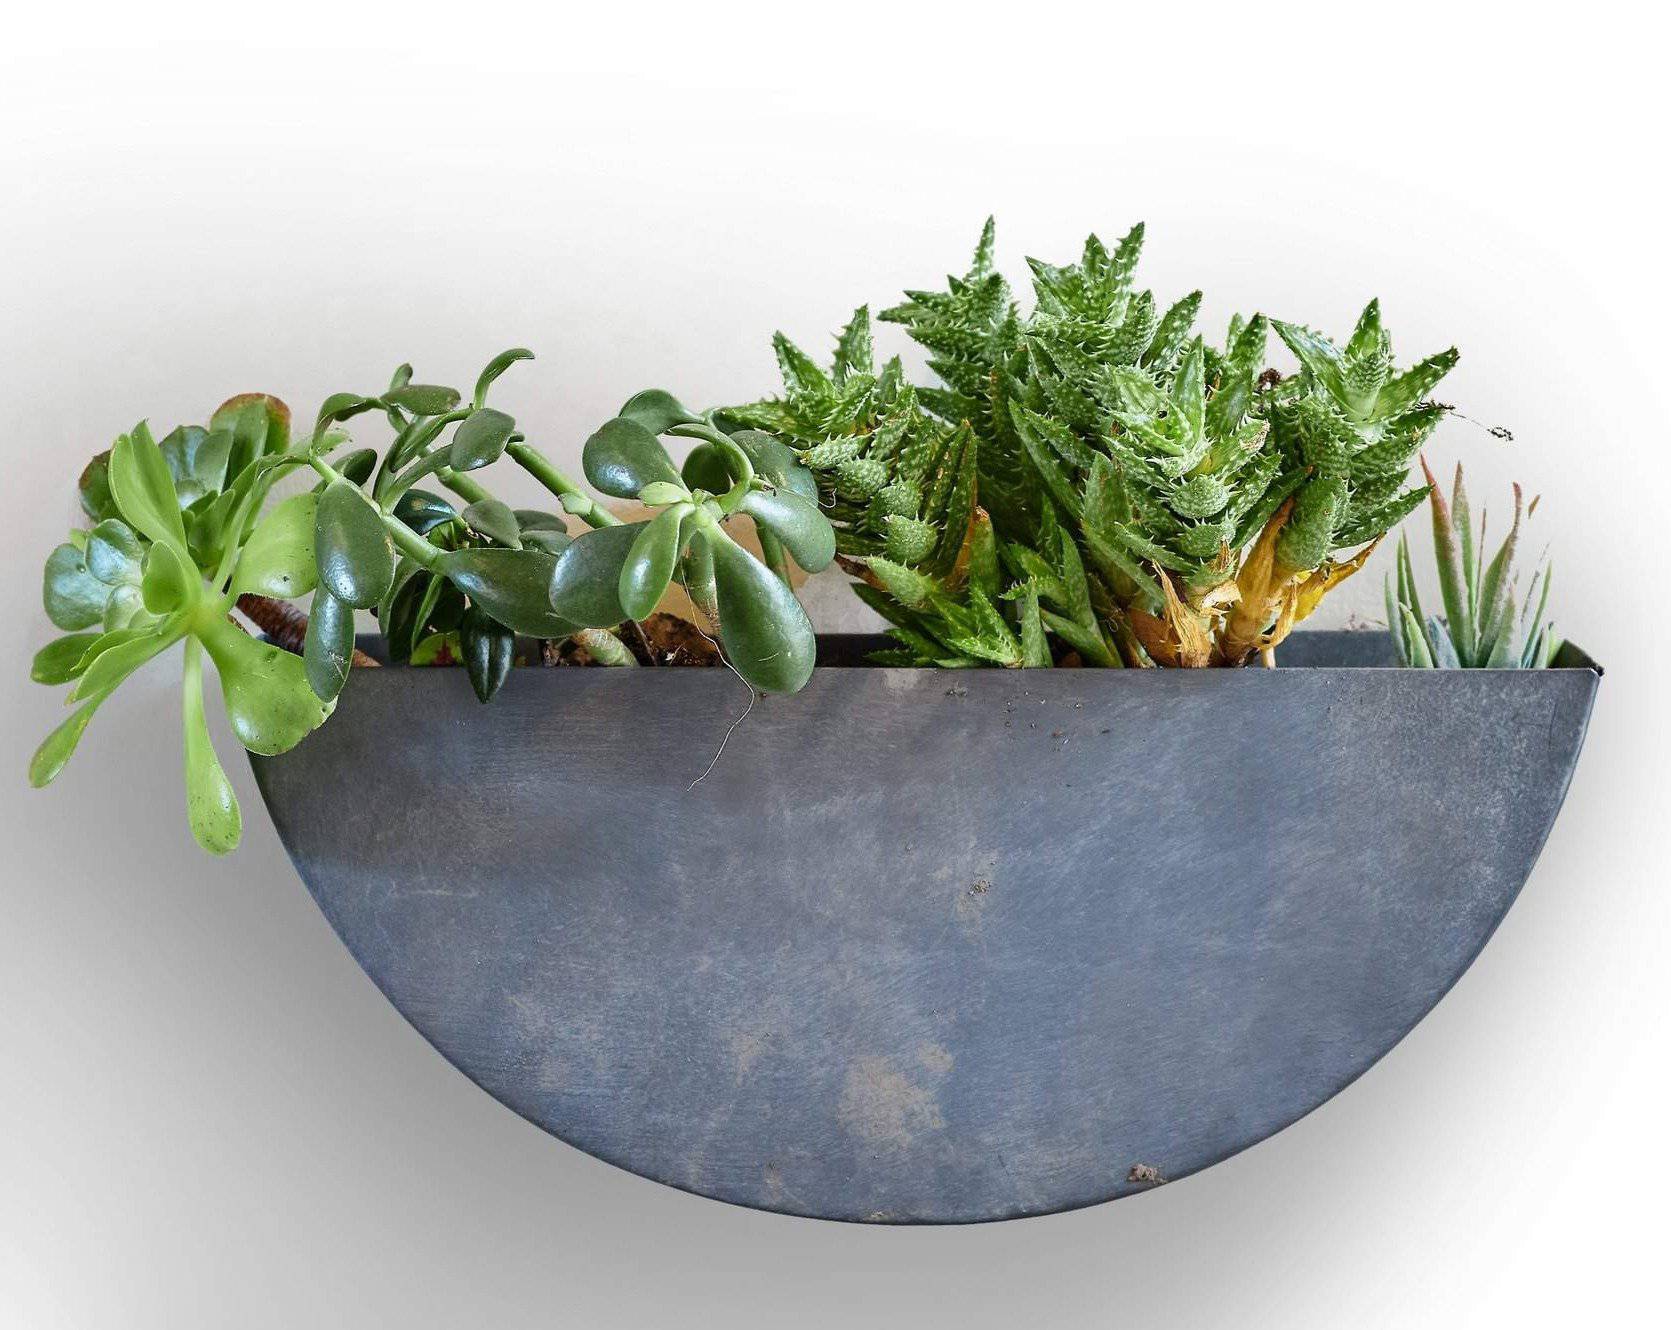 7 Popular Planter Materials to Use Indoors or Outdoors